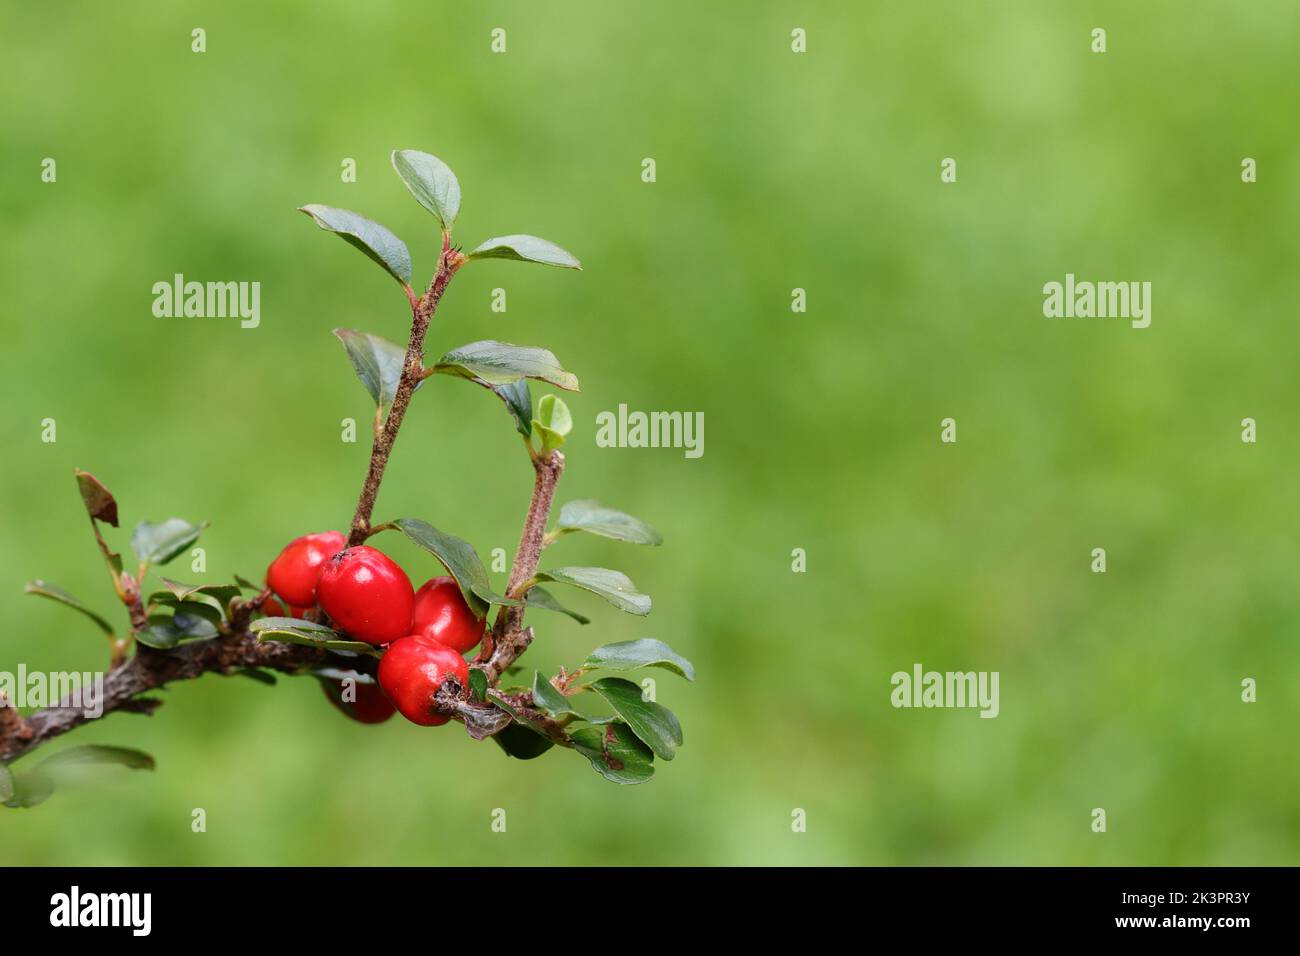 beautiful red fruits ripen on a branch of a cotoneaster, side view, copy space, green blurry background Stock Photo